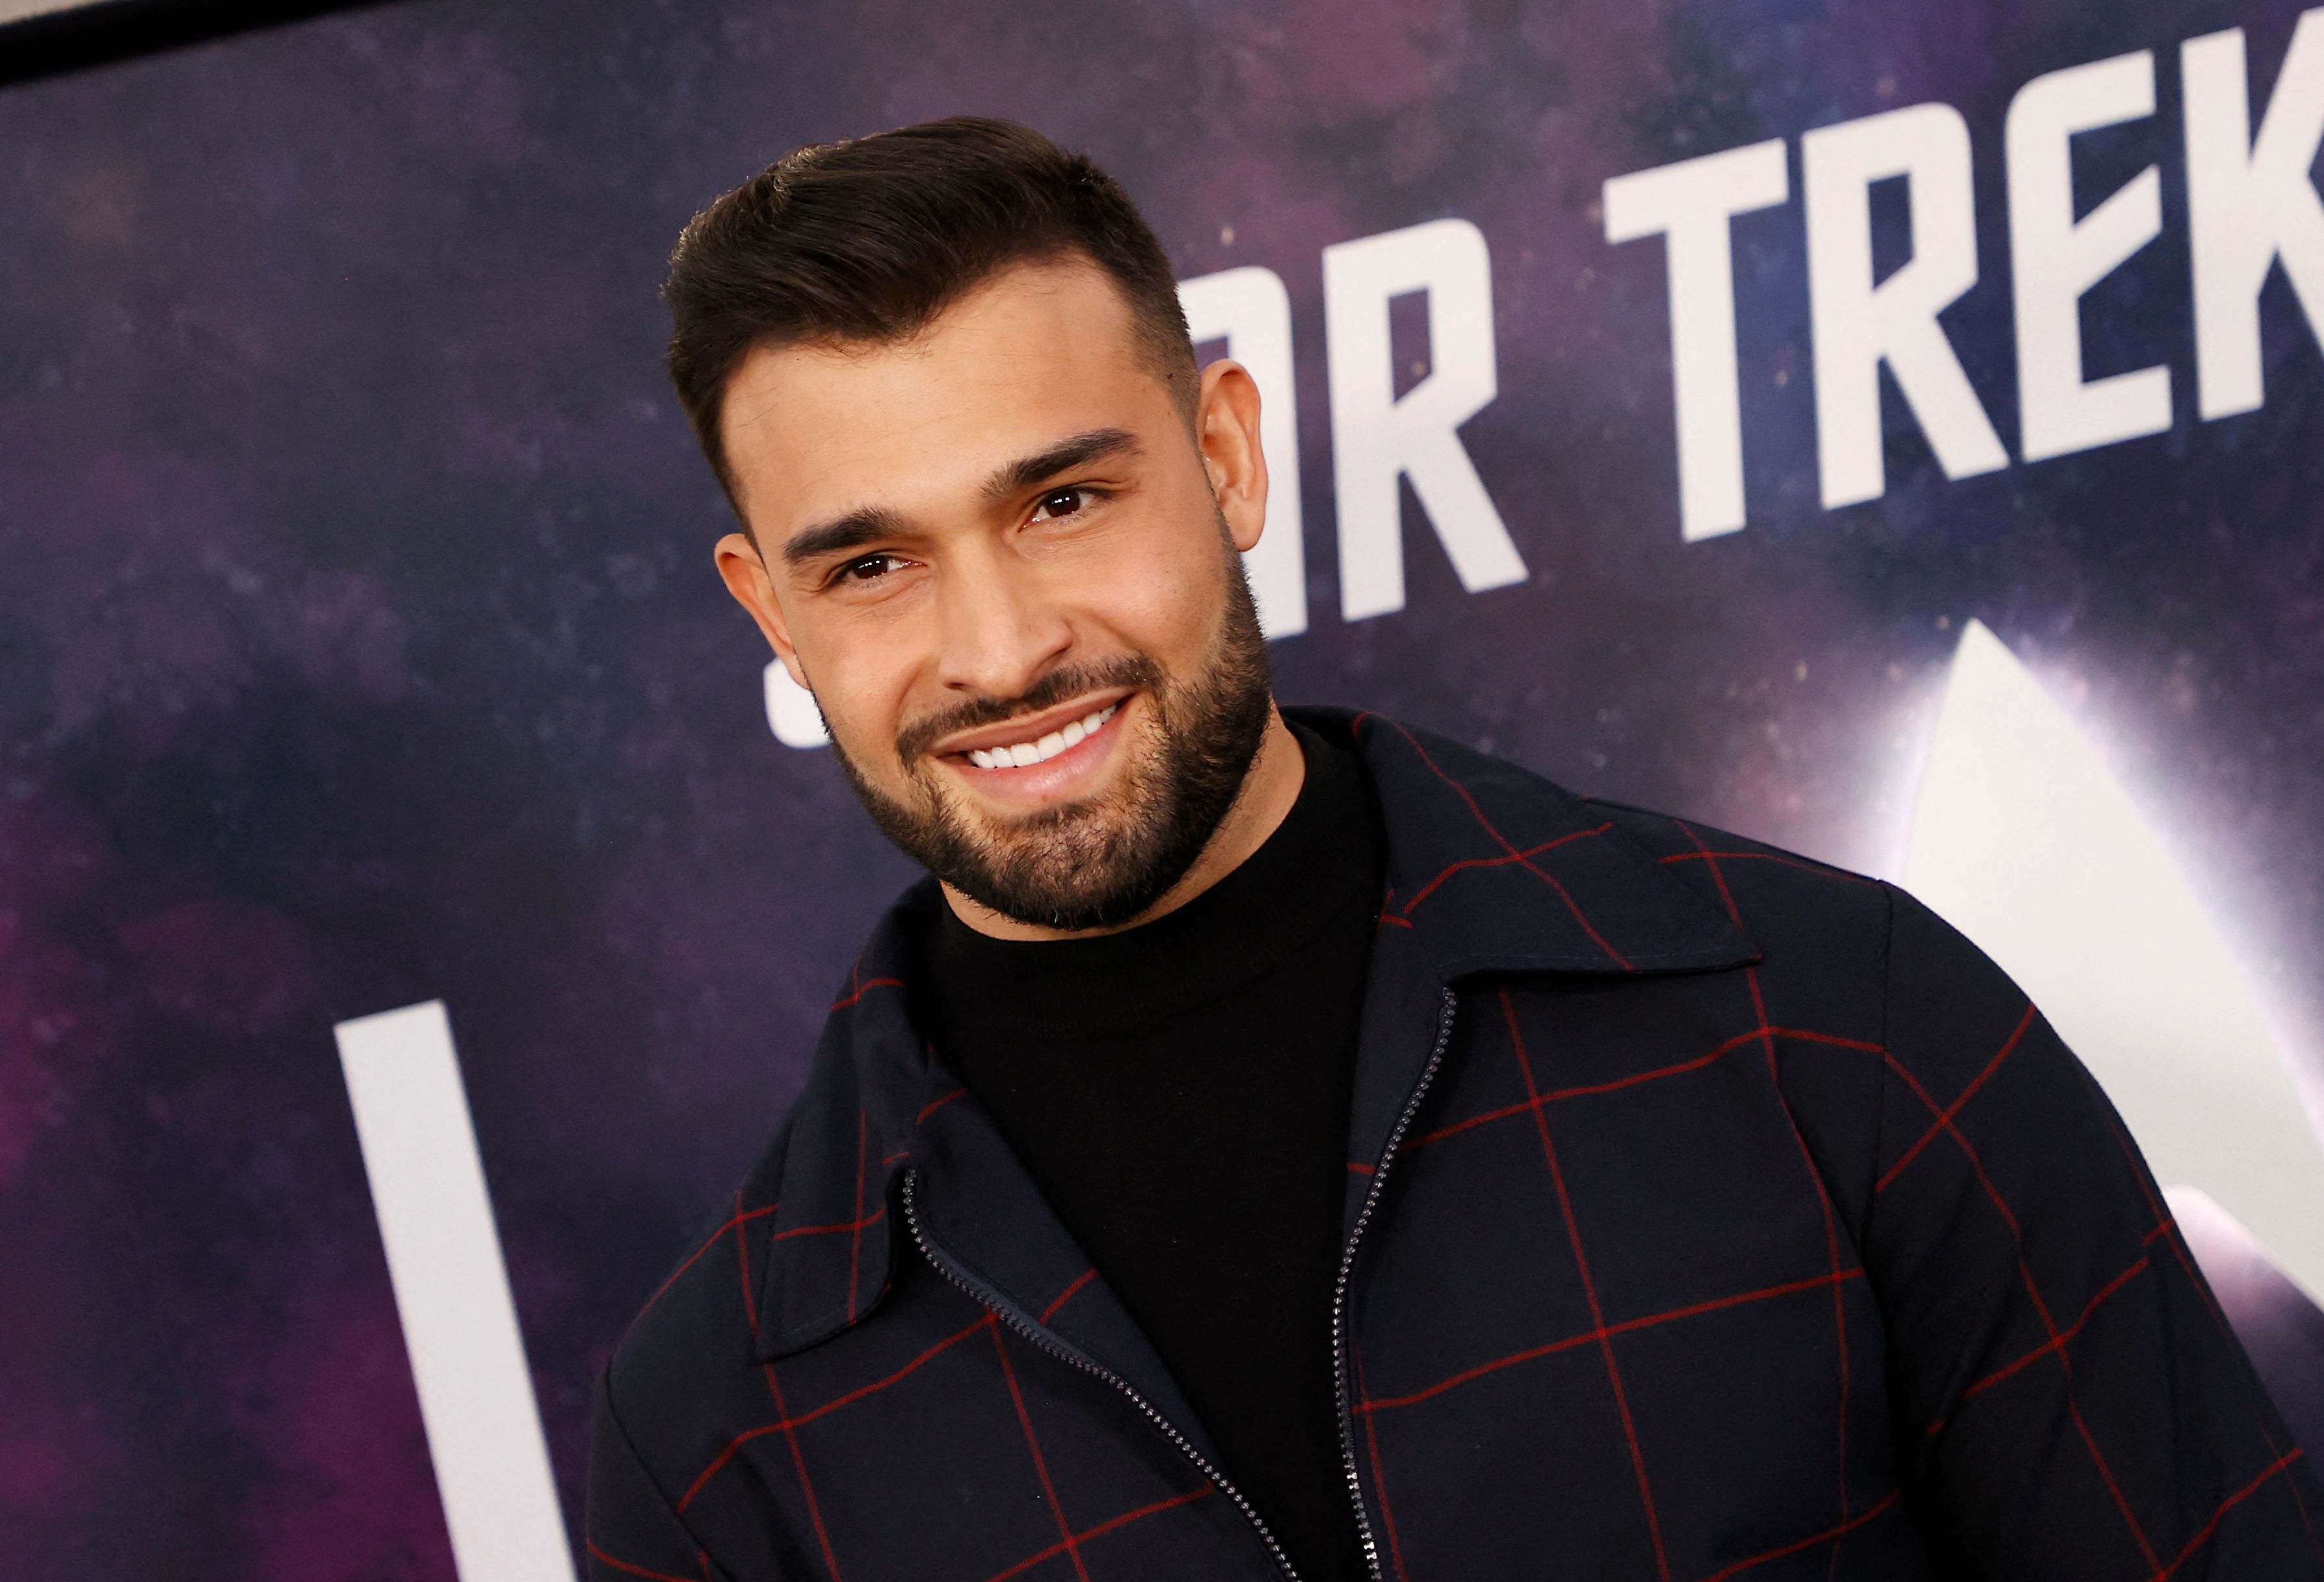 Sam Asghari at the TCL Chinese Theater in Hollywood, California, on February 9, 2023. | Source: Getty Images